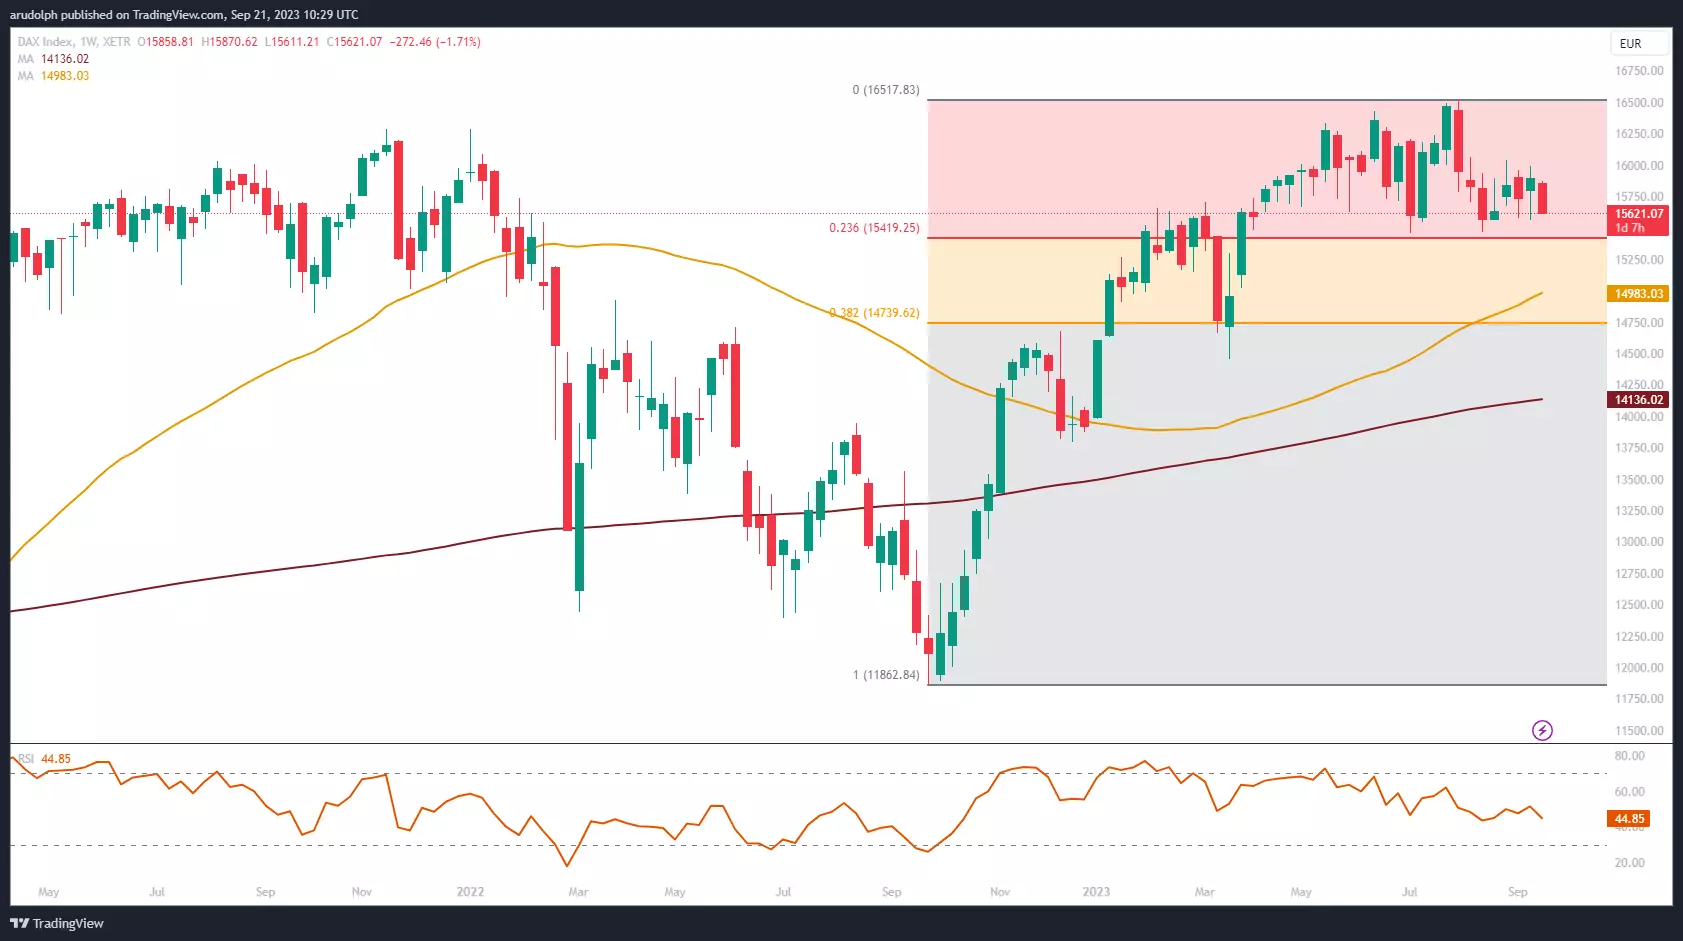 DAX 40 weekly candlestick chart